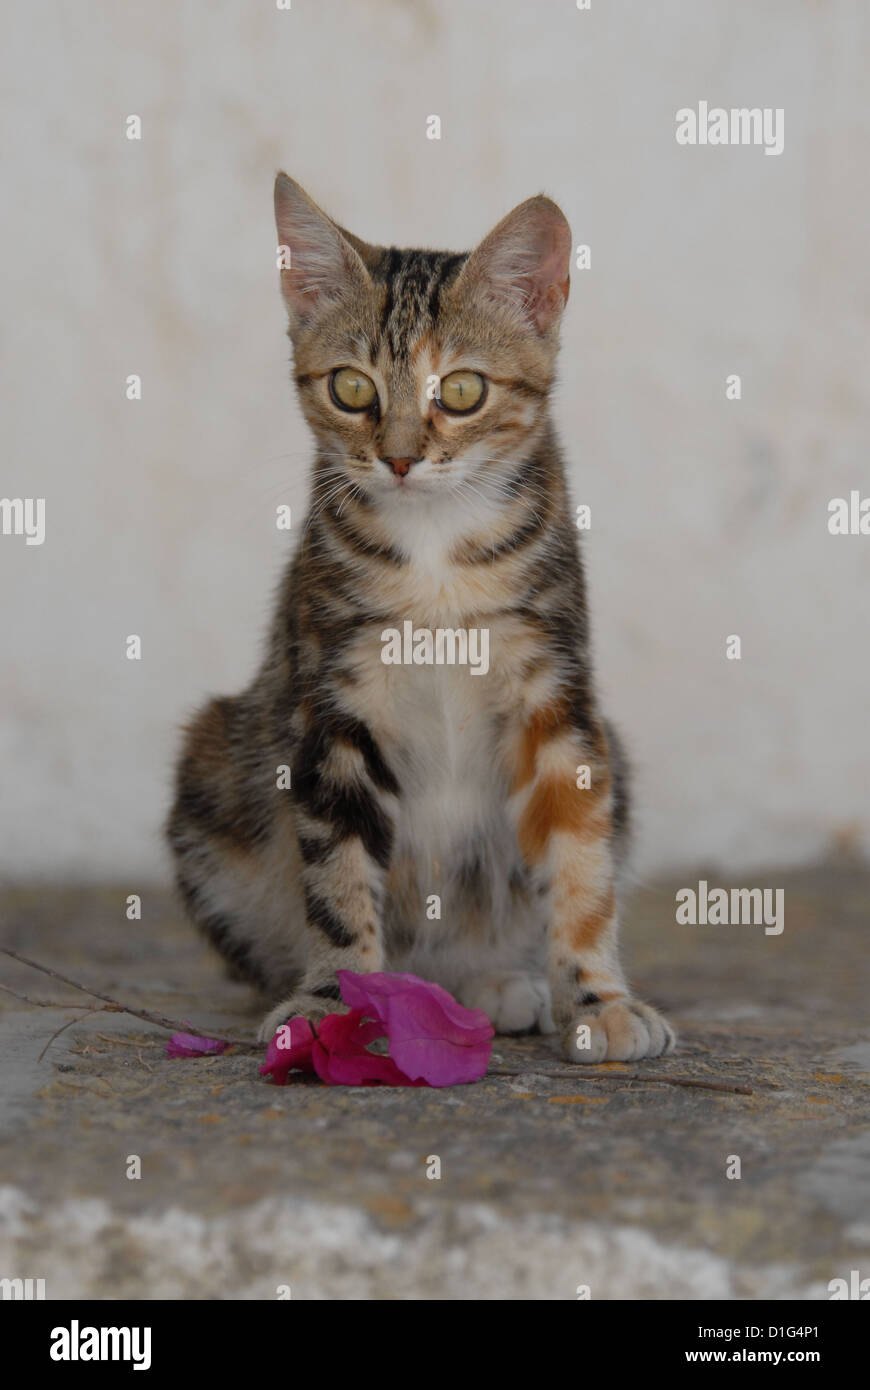 Black Tortie Tabby (Torbie) and White, is lying on a rocky step near by a blossom of Bougainvillea, Greece, Dodecanese Island, Stock Photo